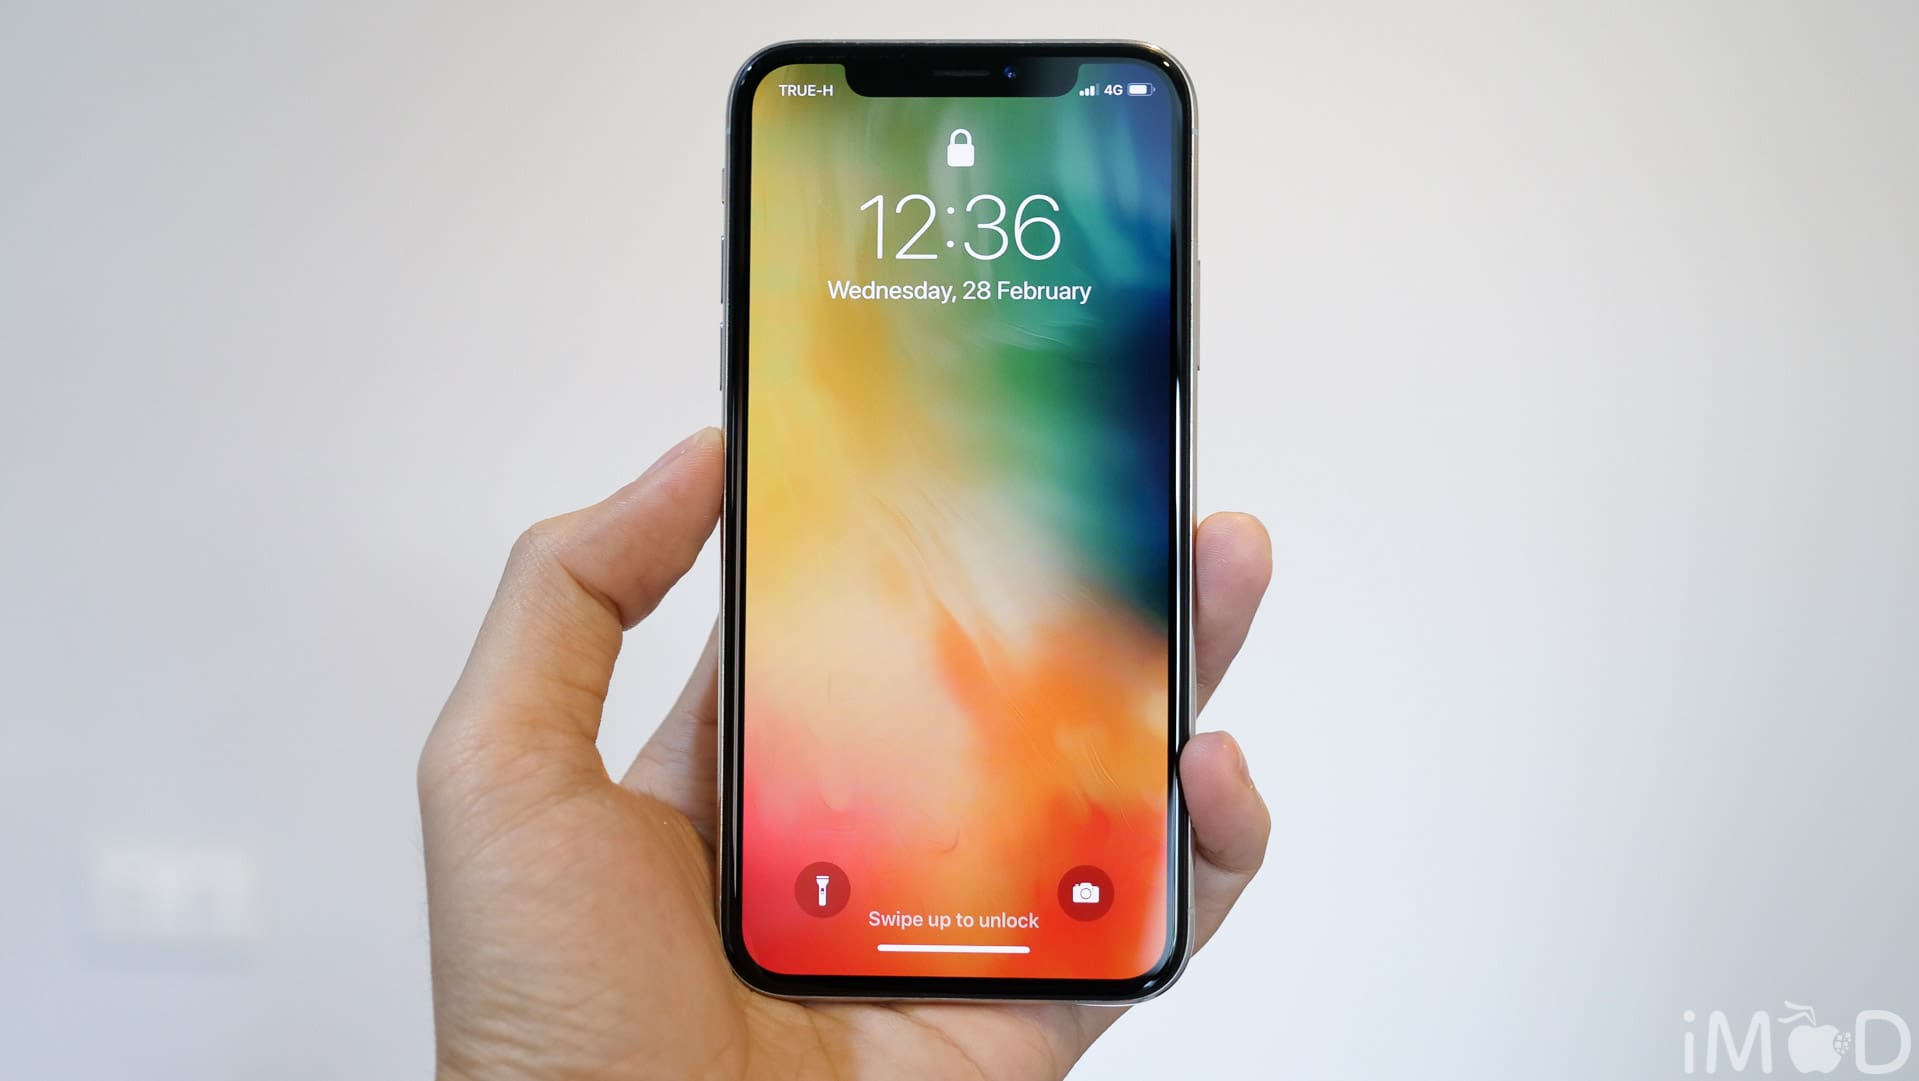 Focus Full Frame Tempered Glass Iphone X 0674 2